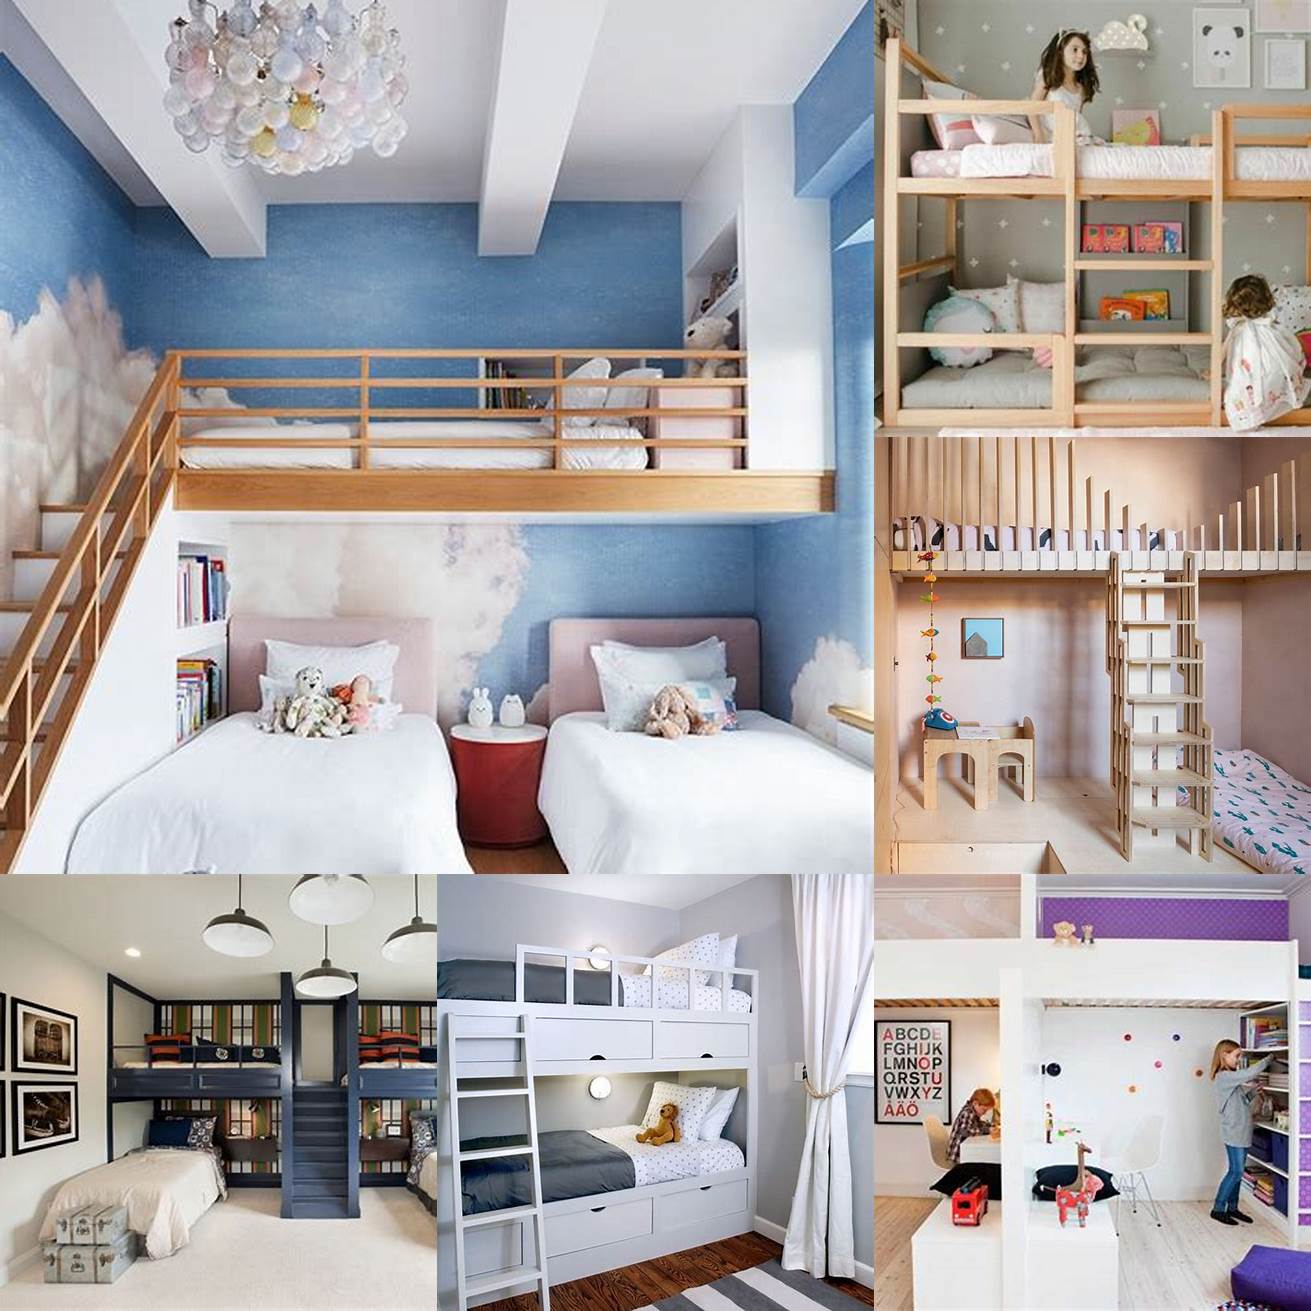 A space-saving bunk bed for siblings who share a room